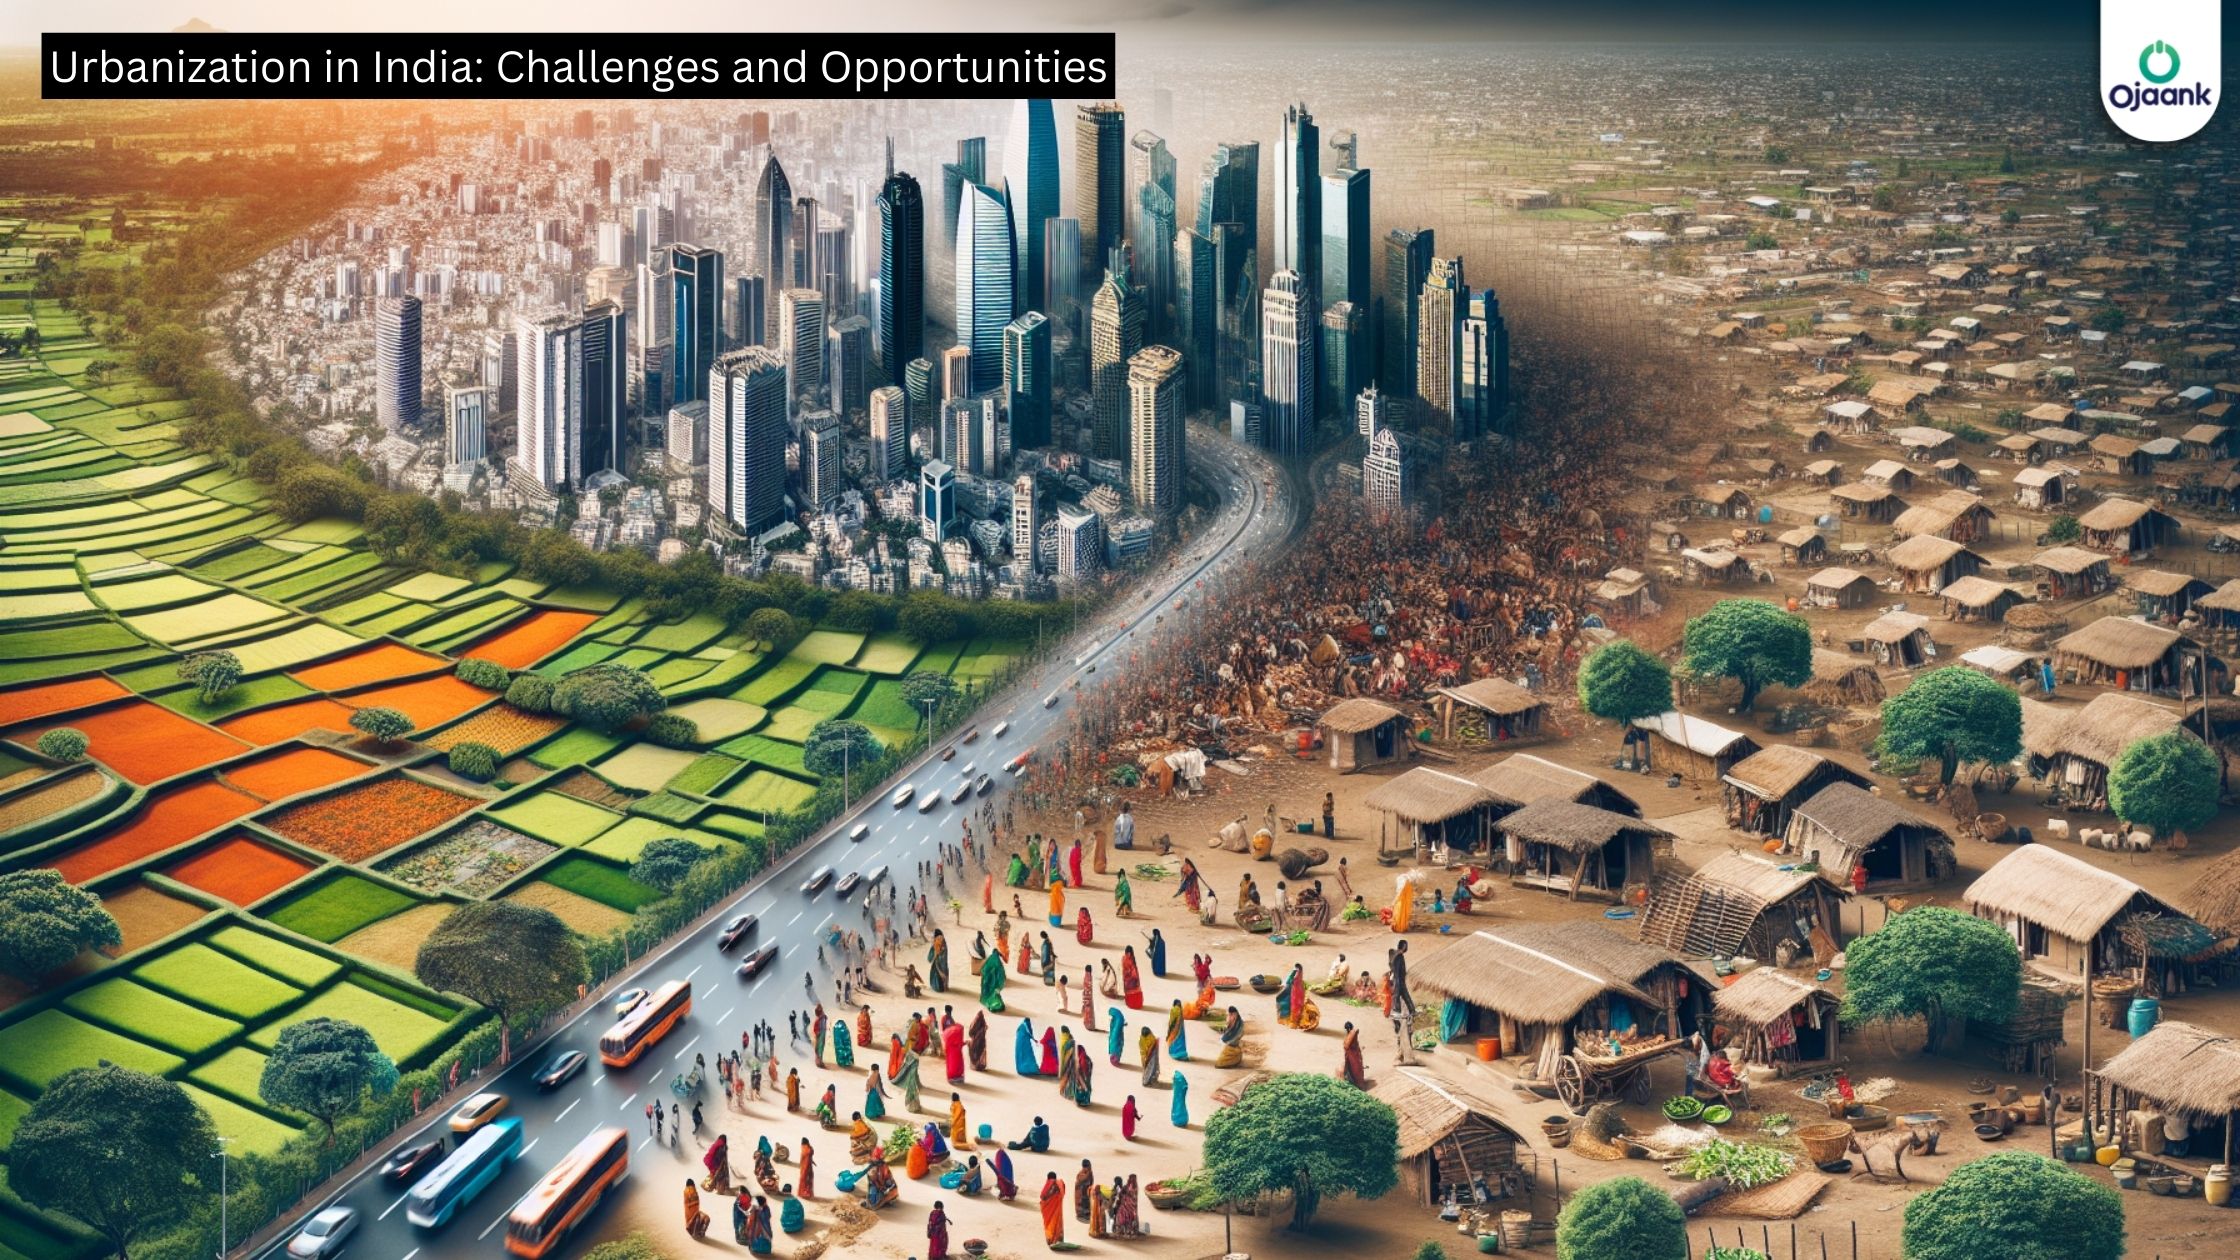 Urbanization in India: Challenges and Opportunities